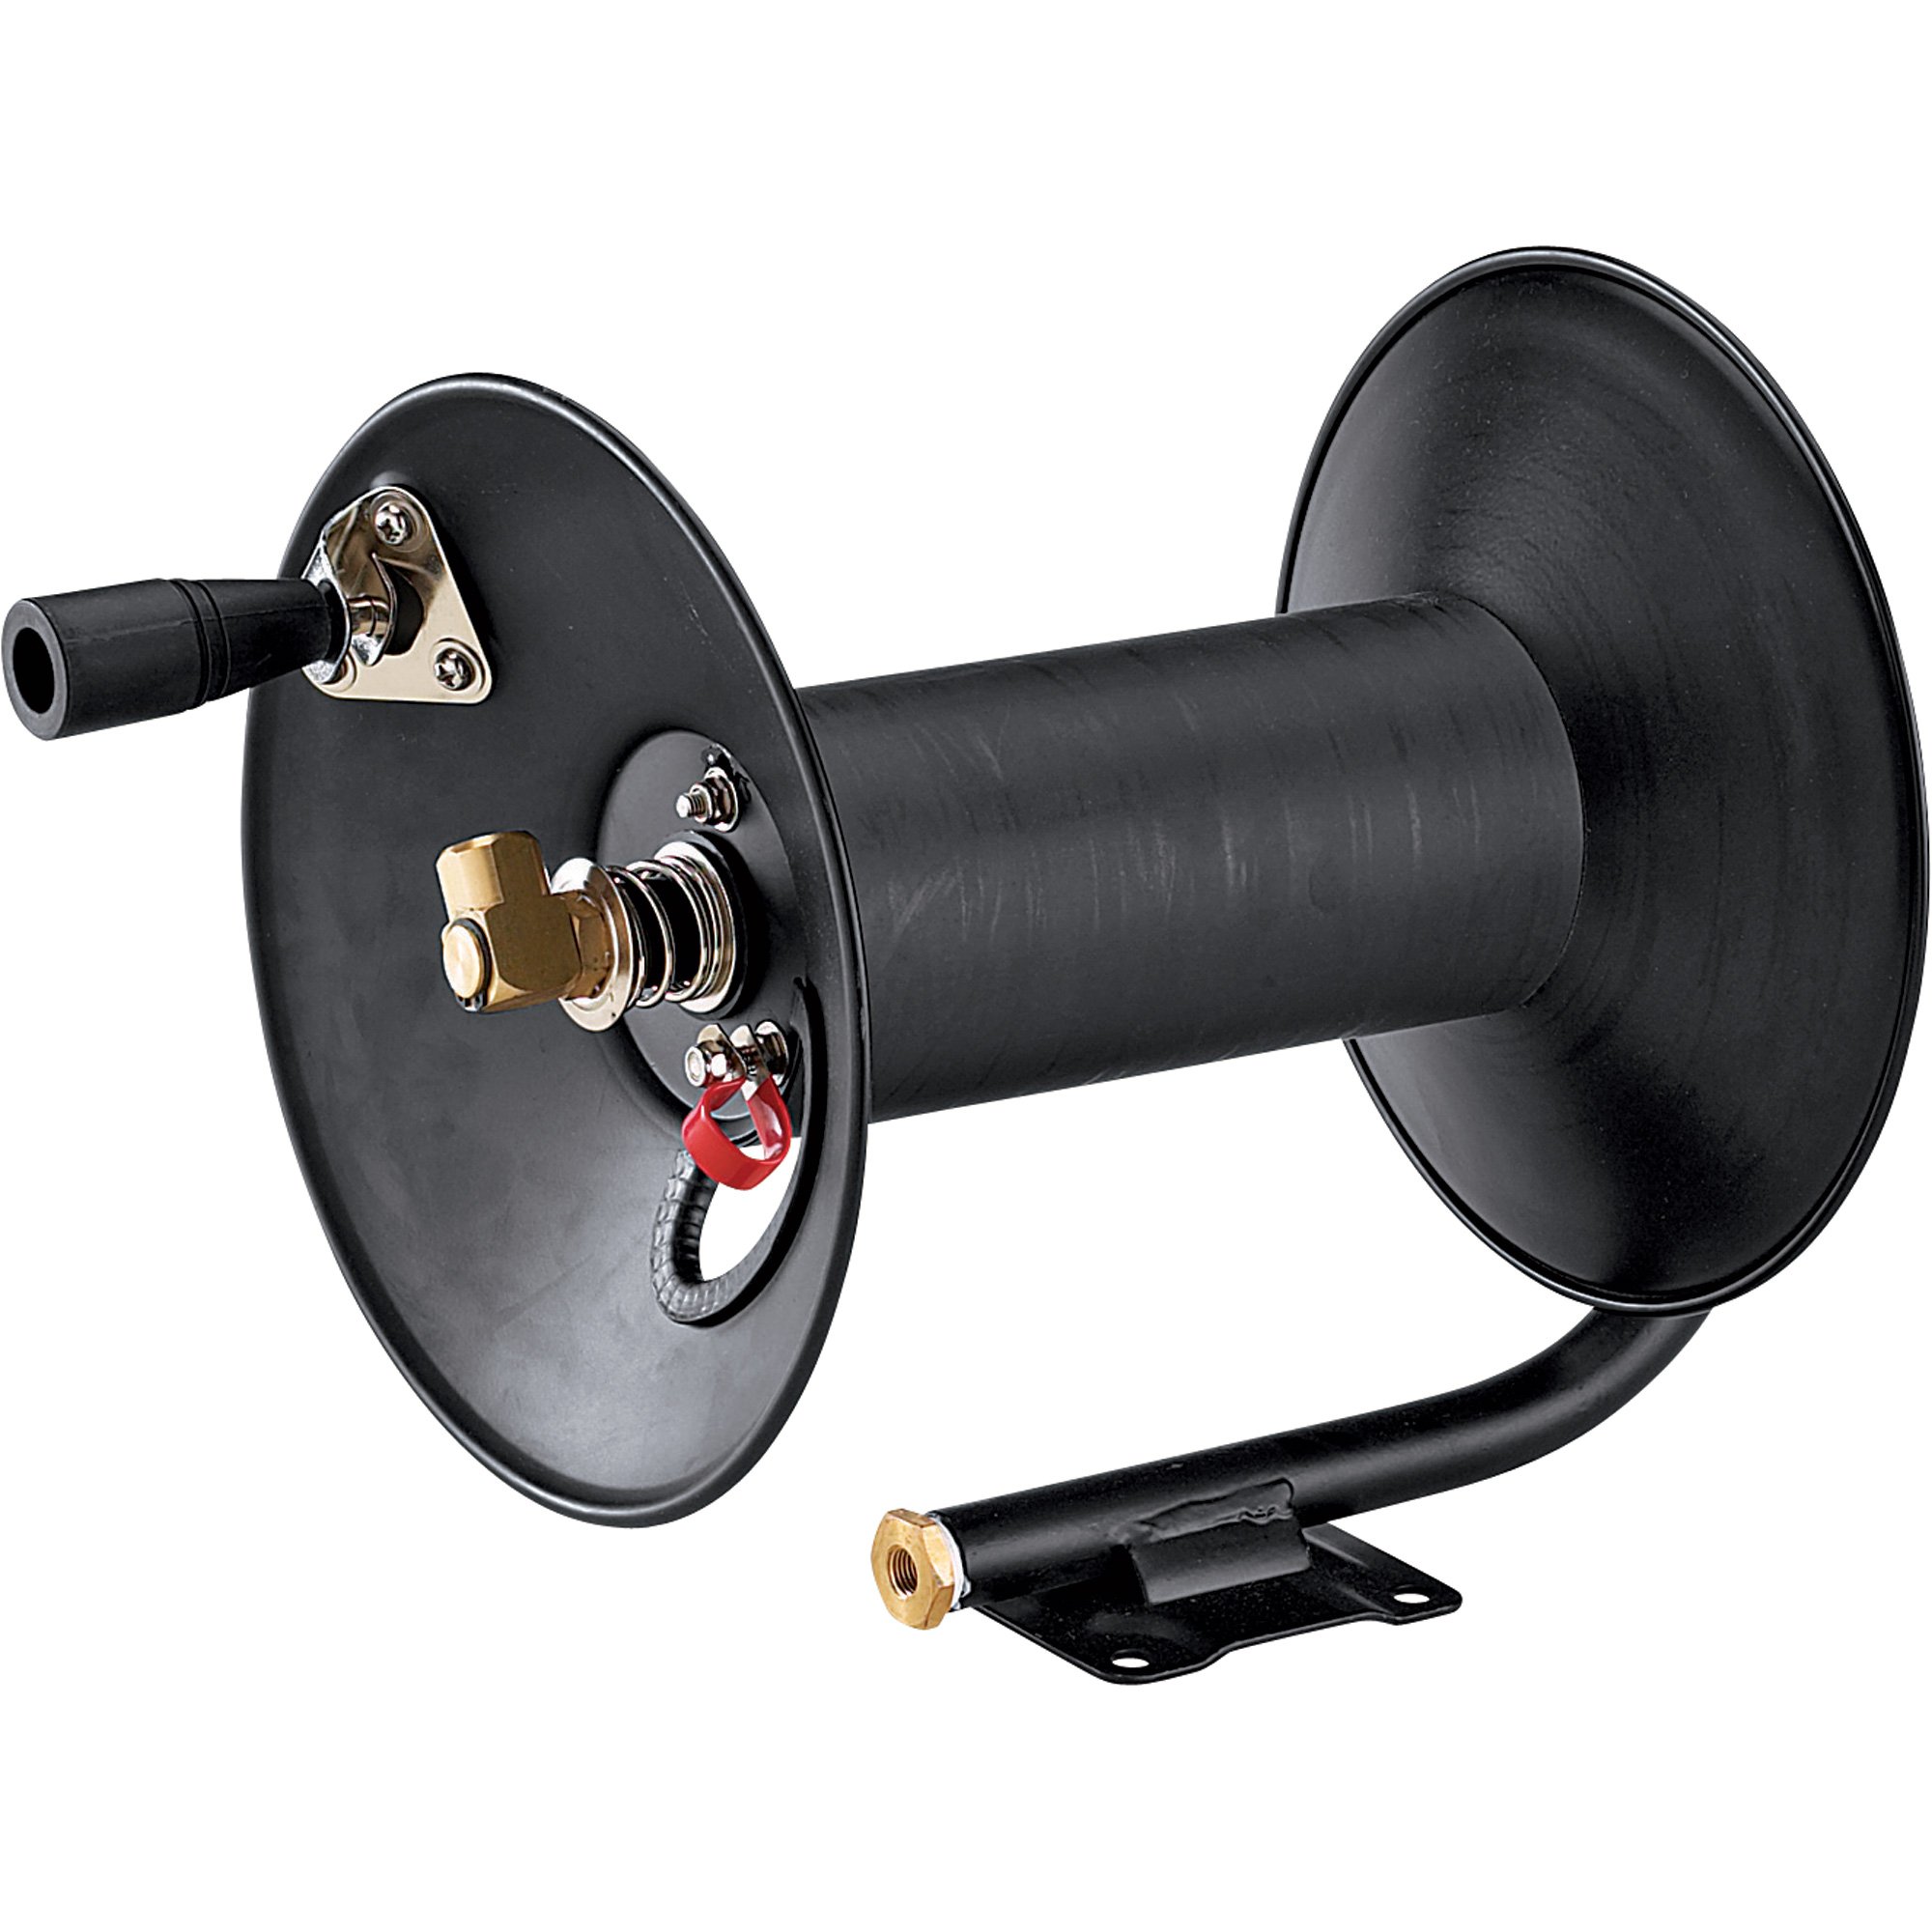 Please see replacement item# 49590. ReelWorks Air Hose Reel with Hand Brake  — Holds 3/8in. x 100ft. Hose